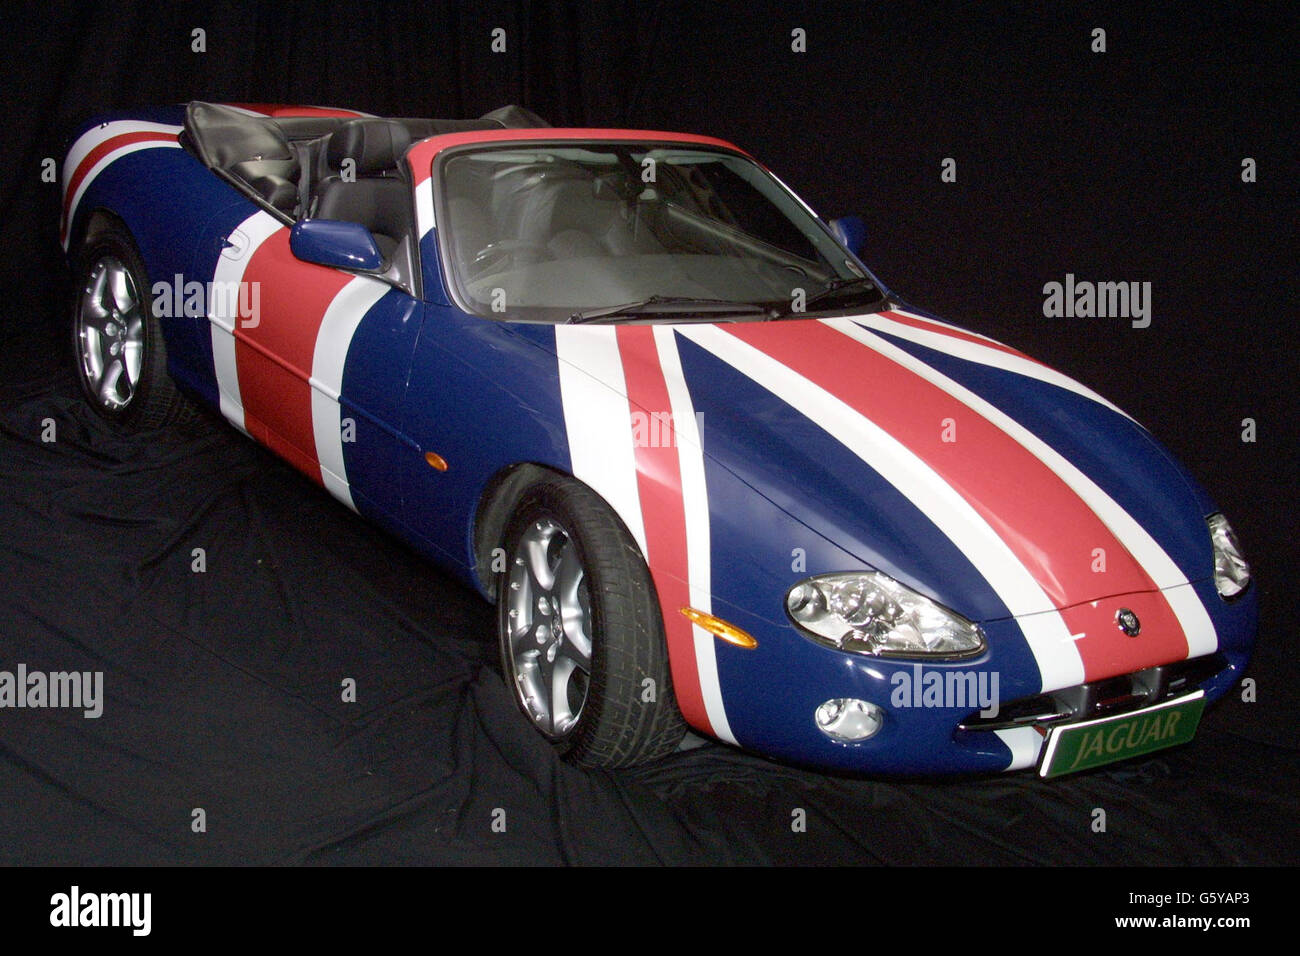 The Shaguar featured in the new Austin Powers film, 'Goldmember' at the Dorchester Hotel in London. The third instalment of the Austin Powers series is released in the UK on 26th July 2002. Stock Photo